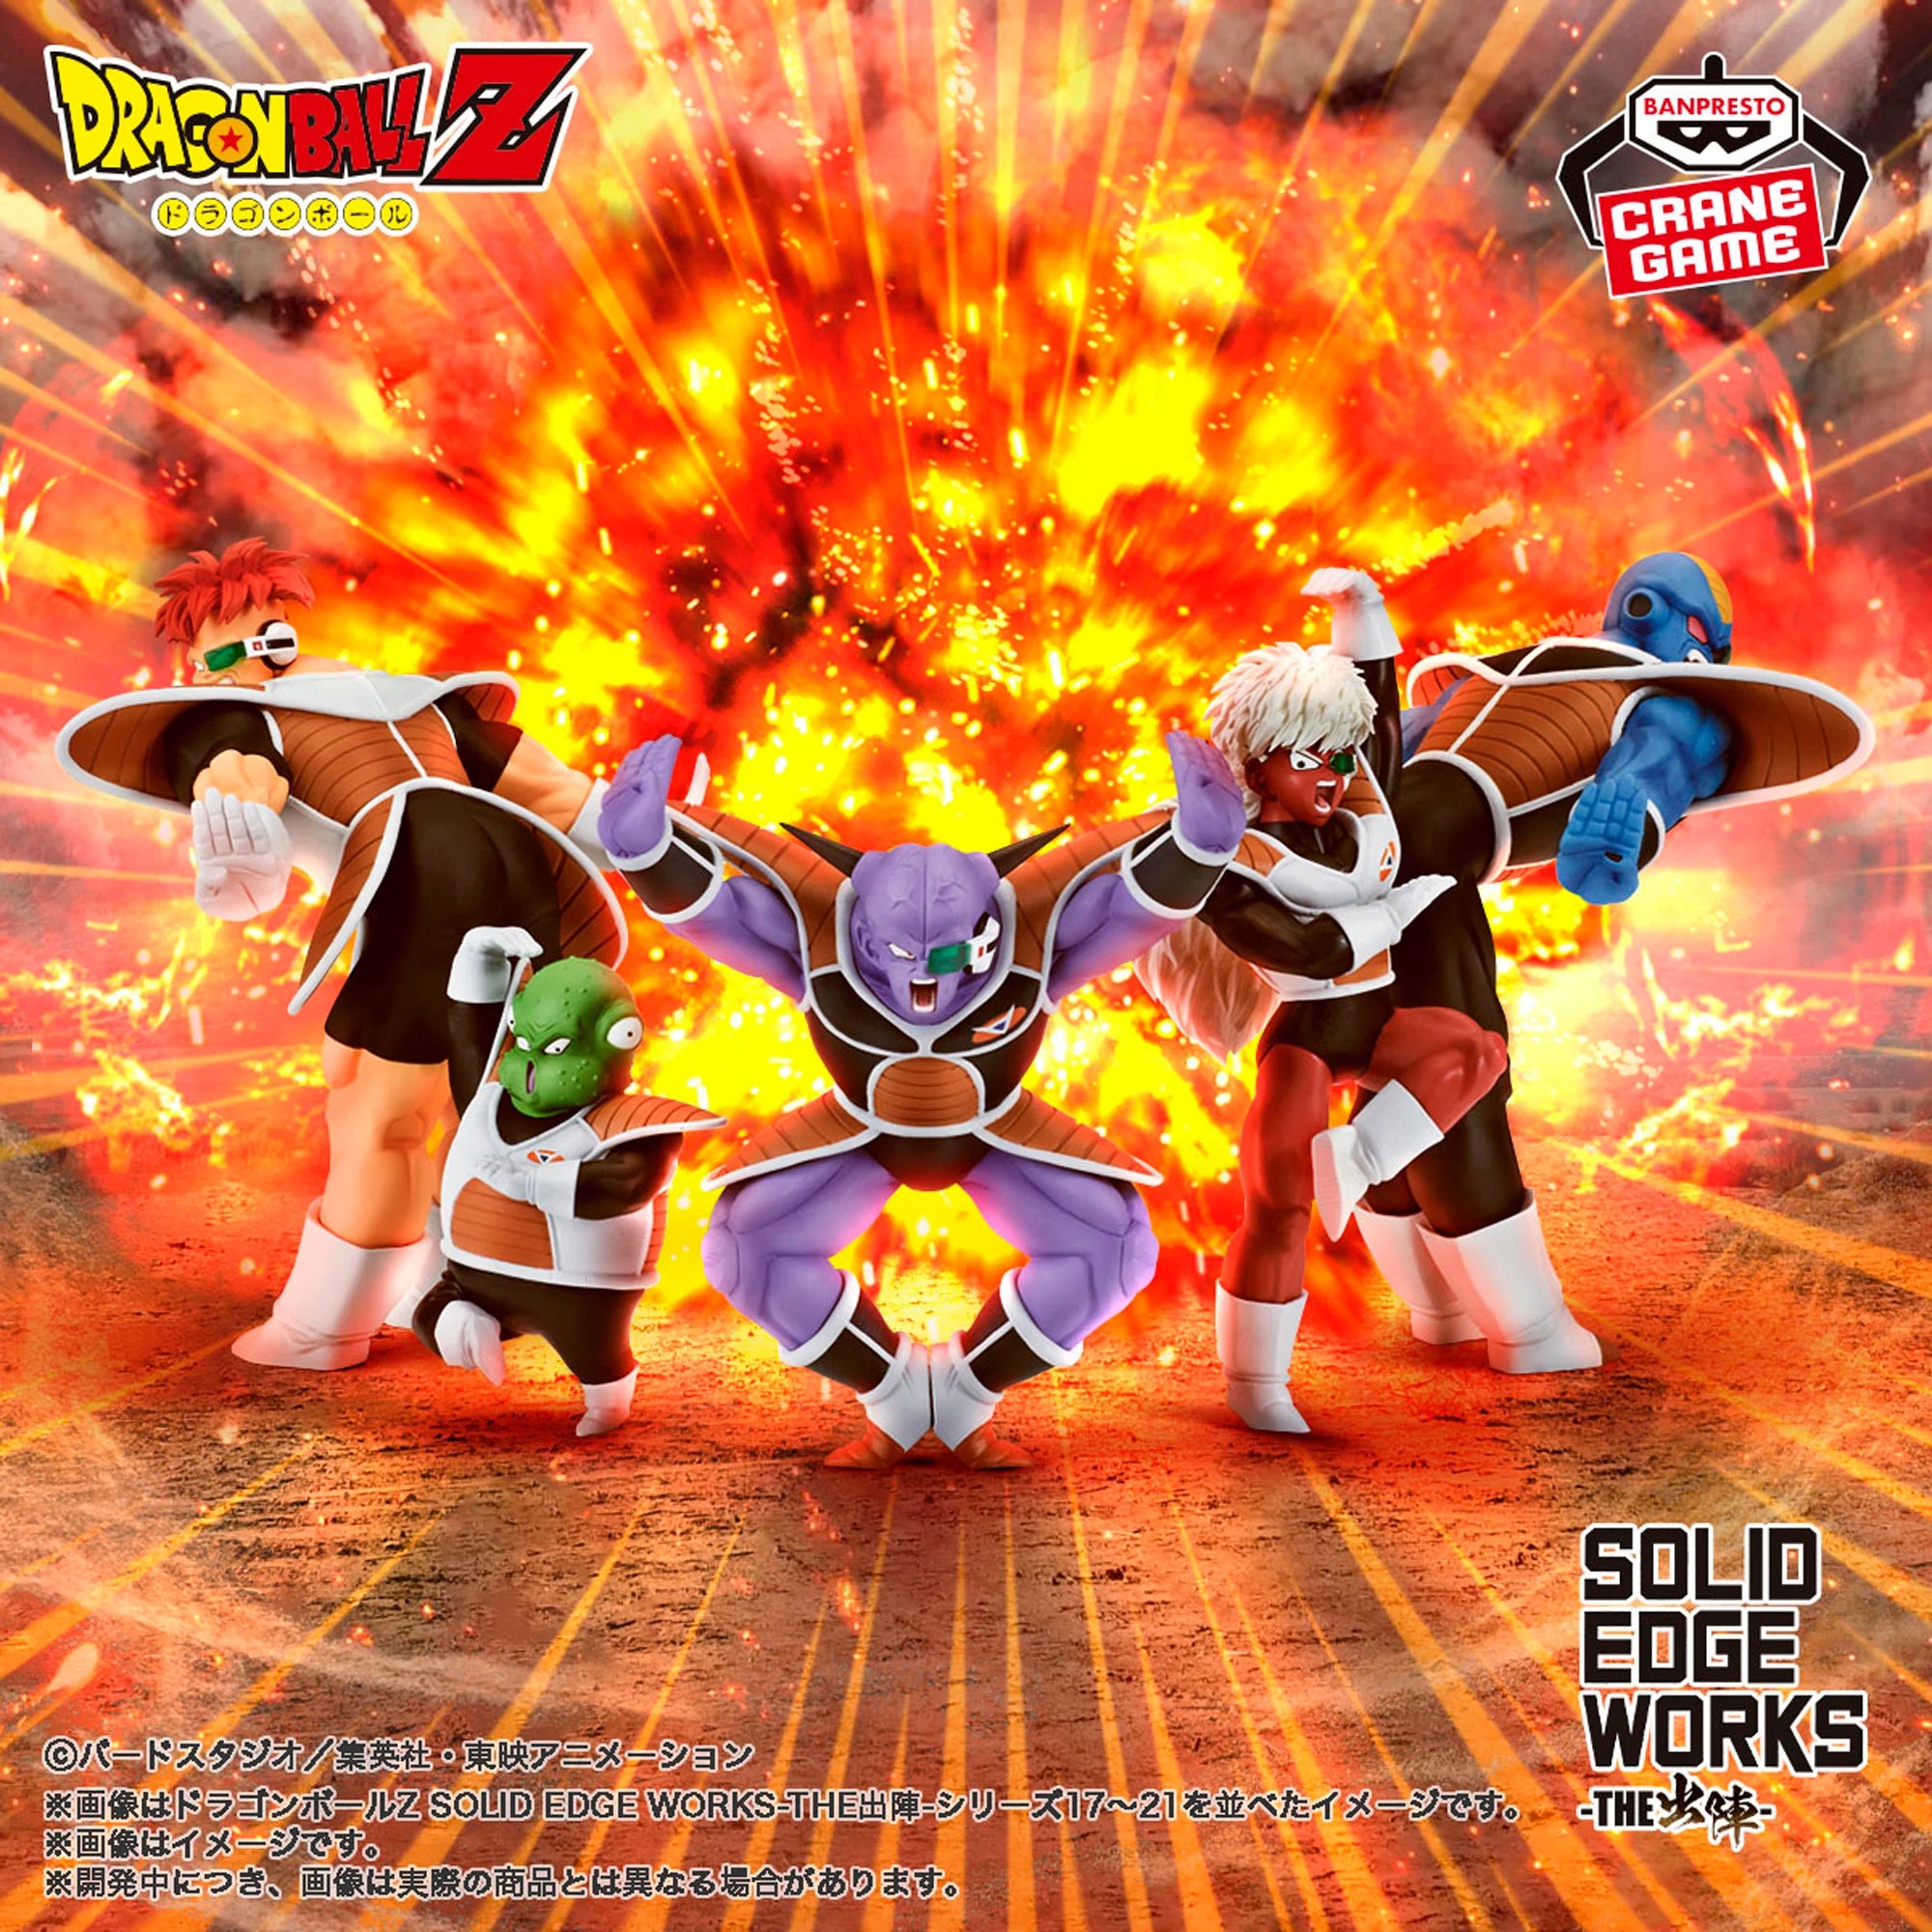 DRAGON BALL Z SOLID EDGE WORKS -THE DEPARTURE- 18 JEICE